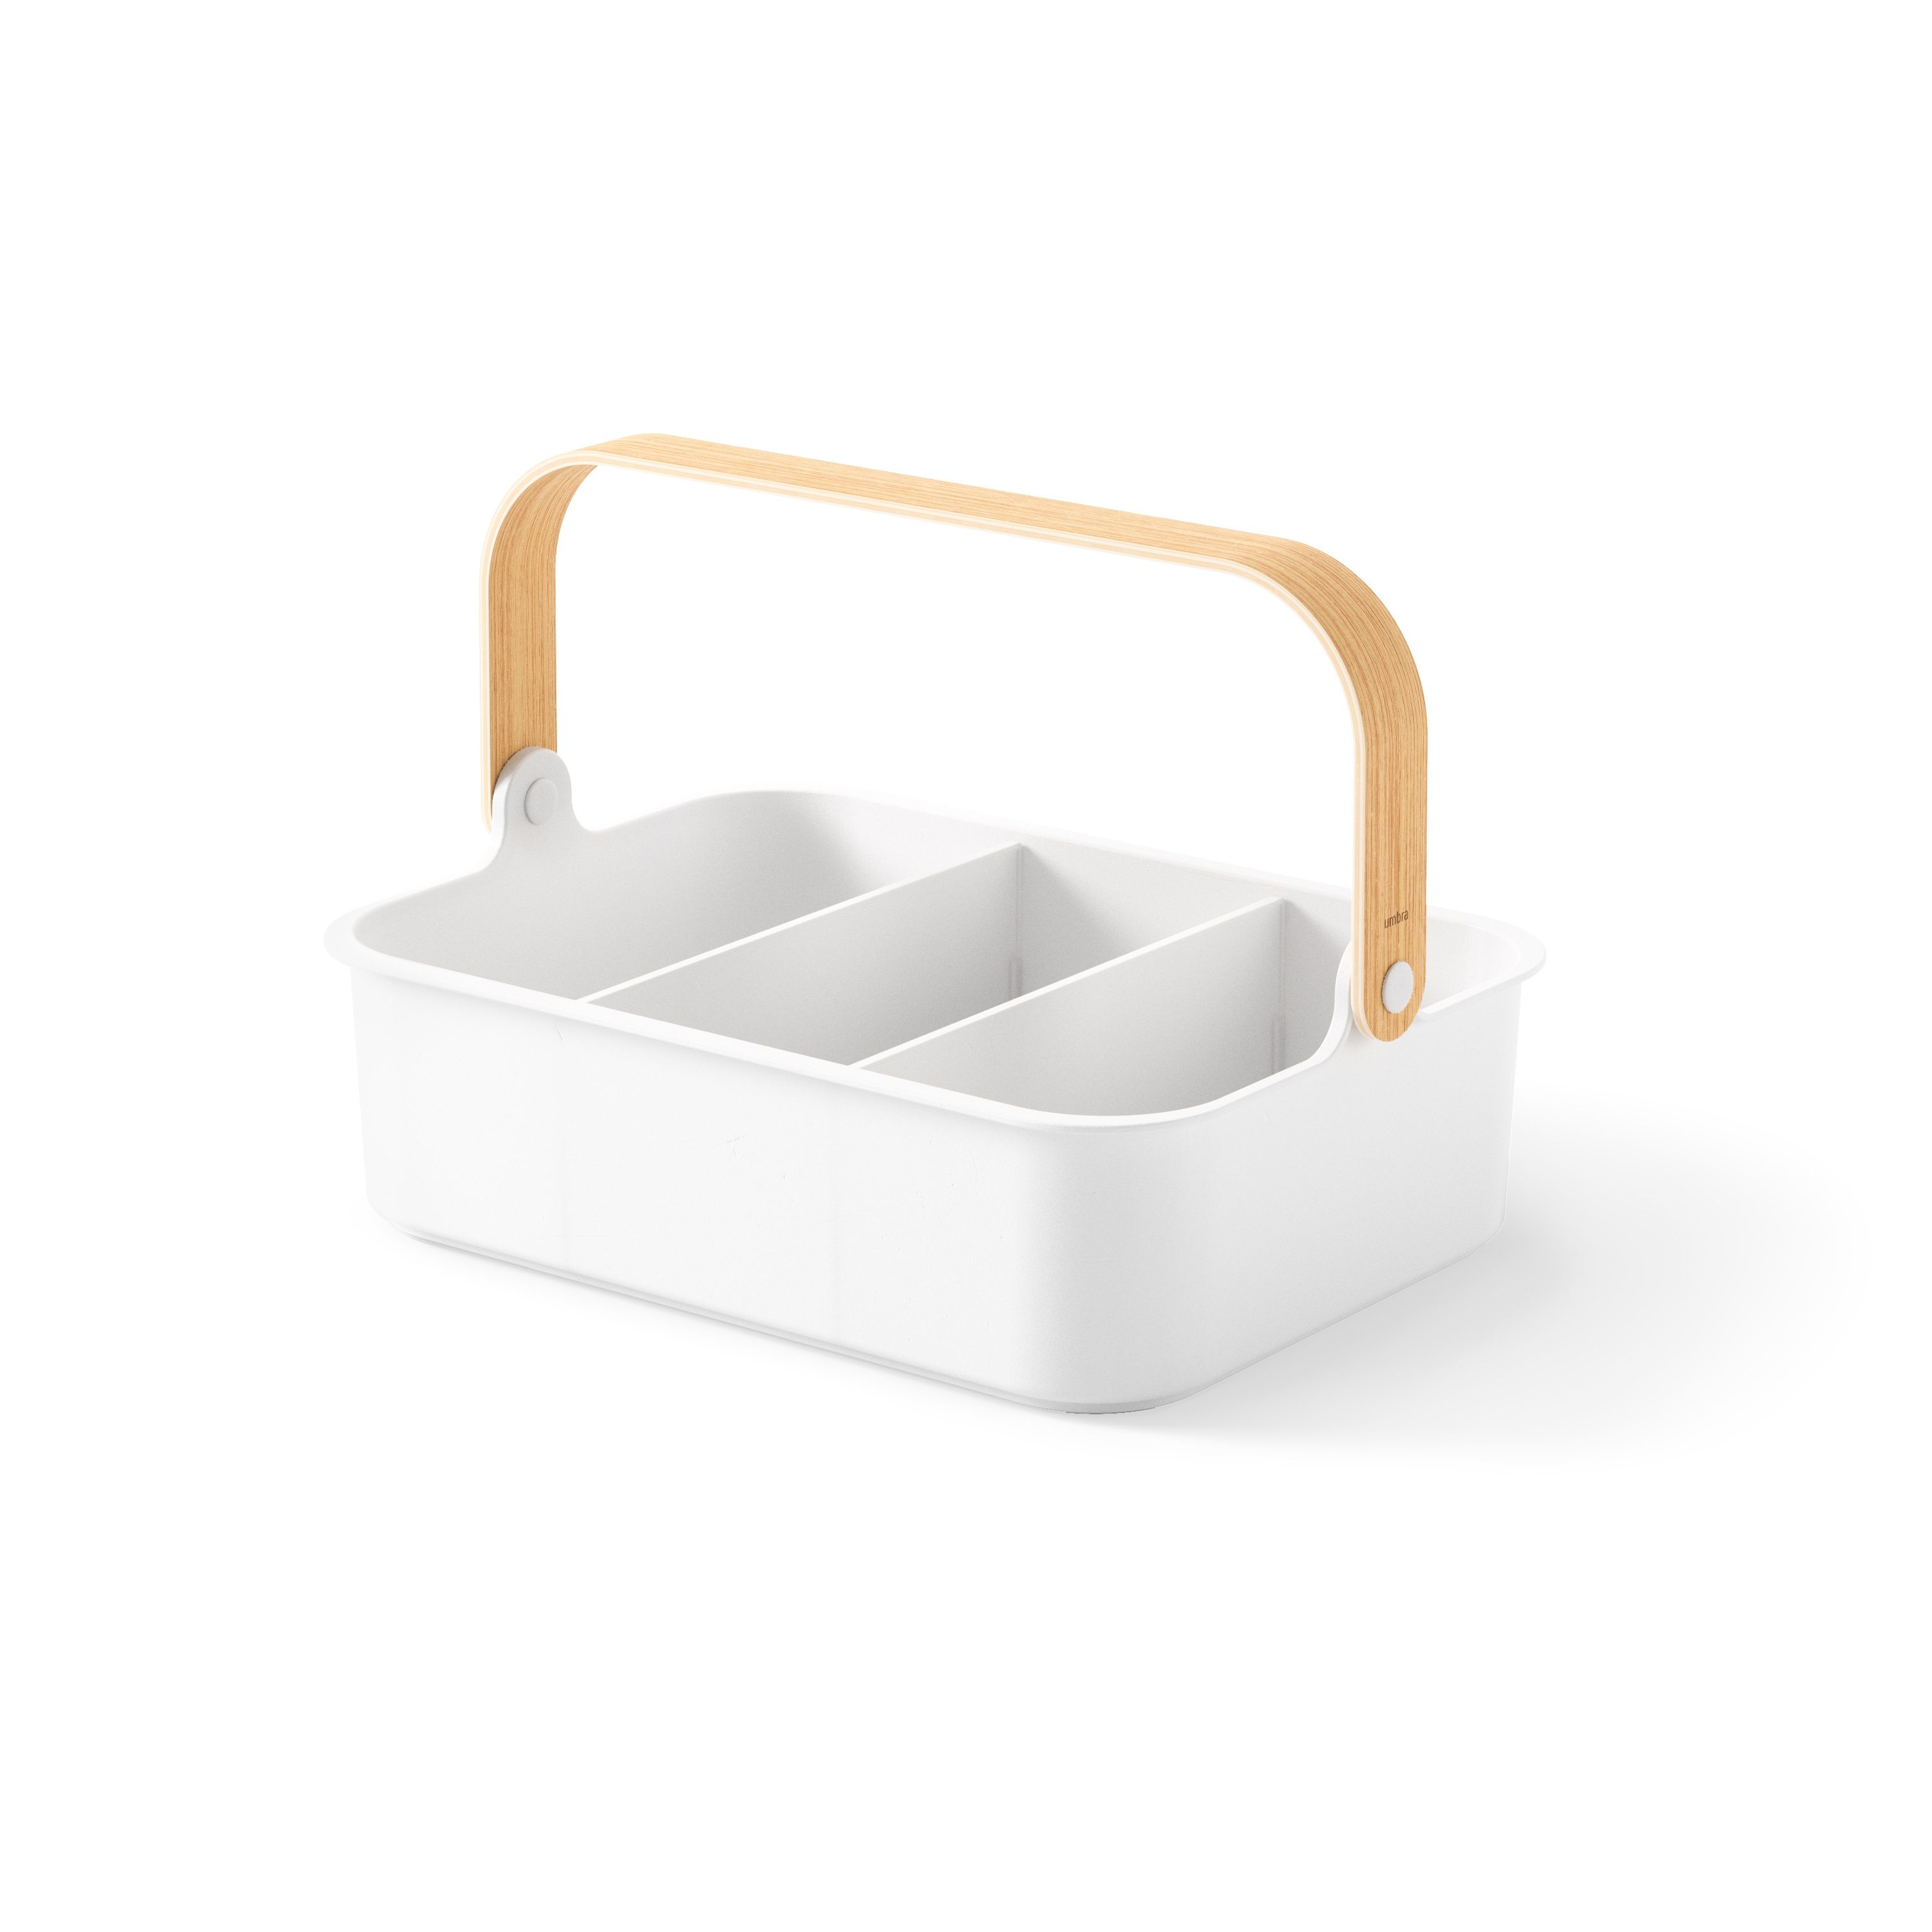 Umbra Bellwood Stackable Bin | The Container Store